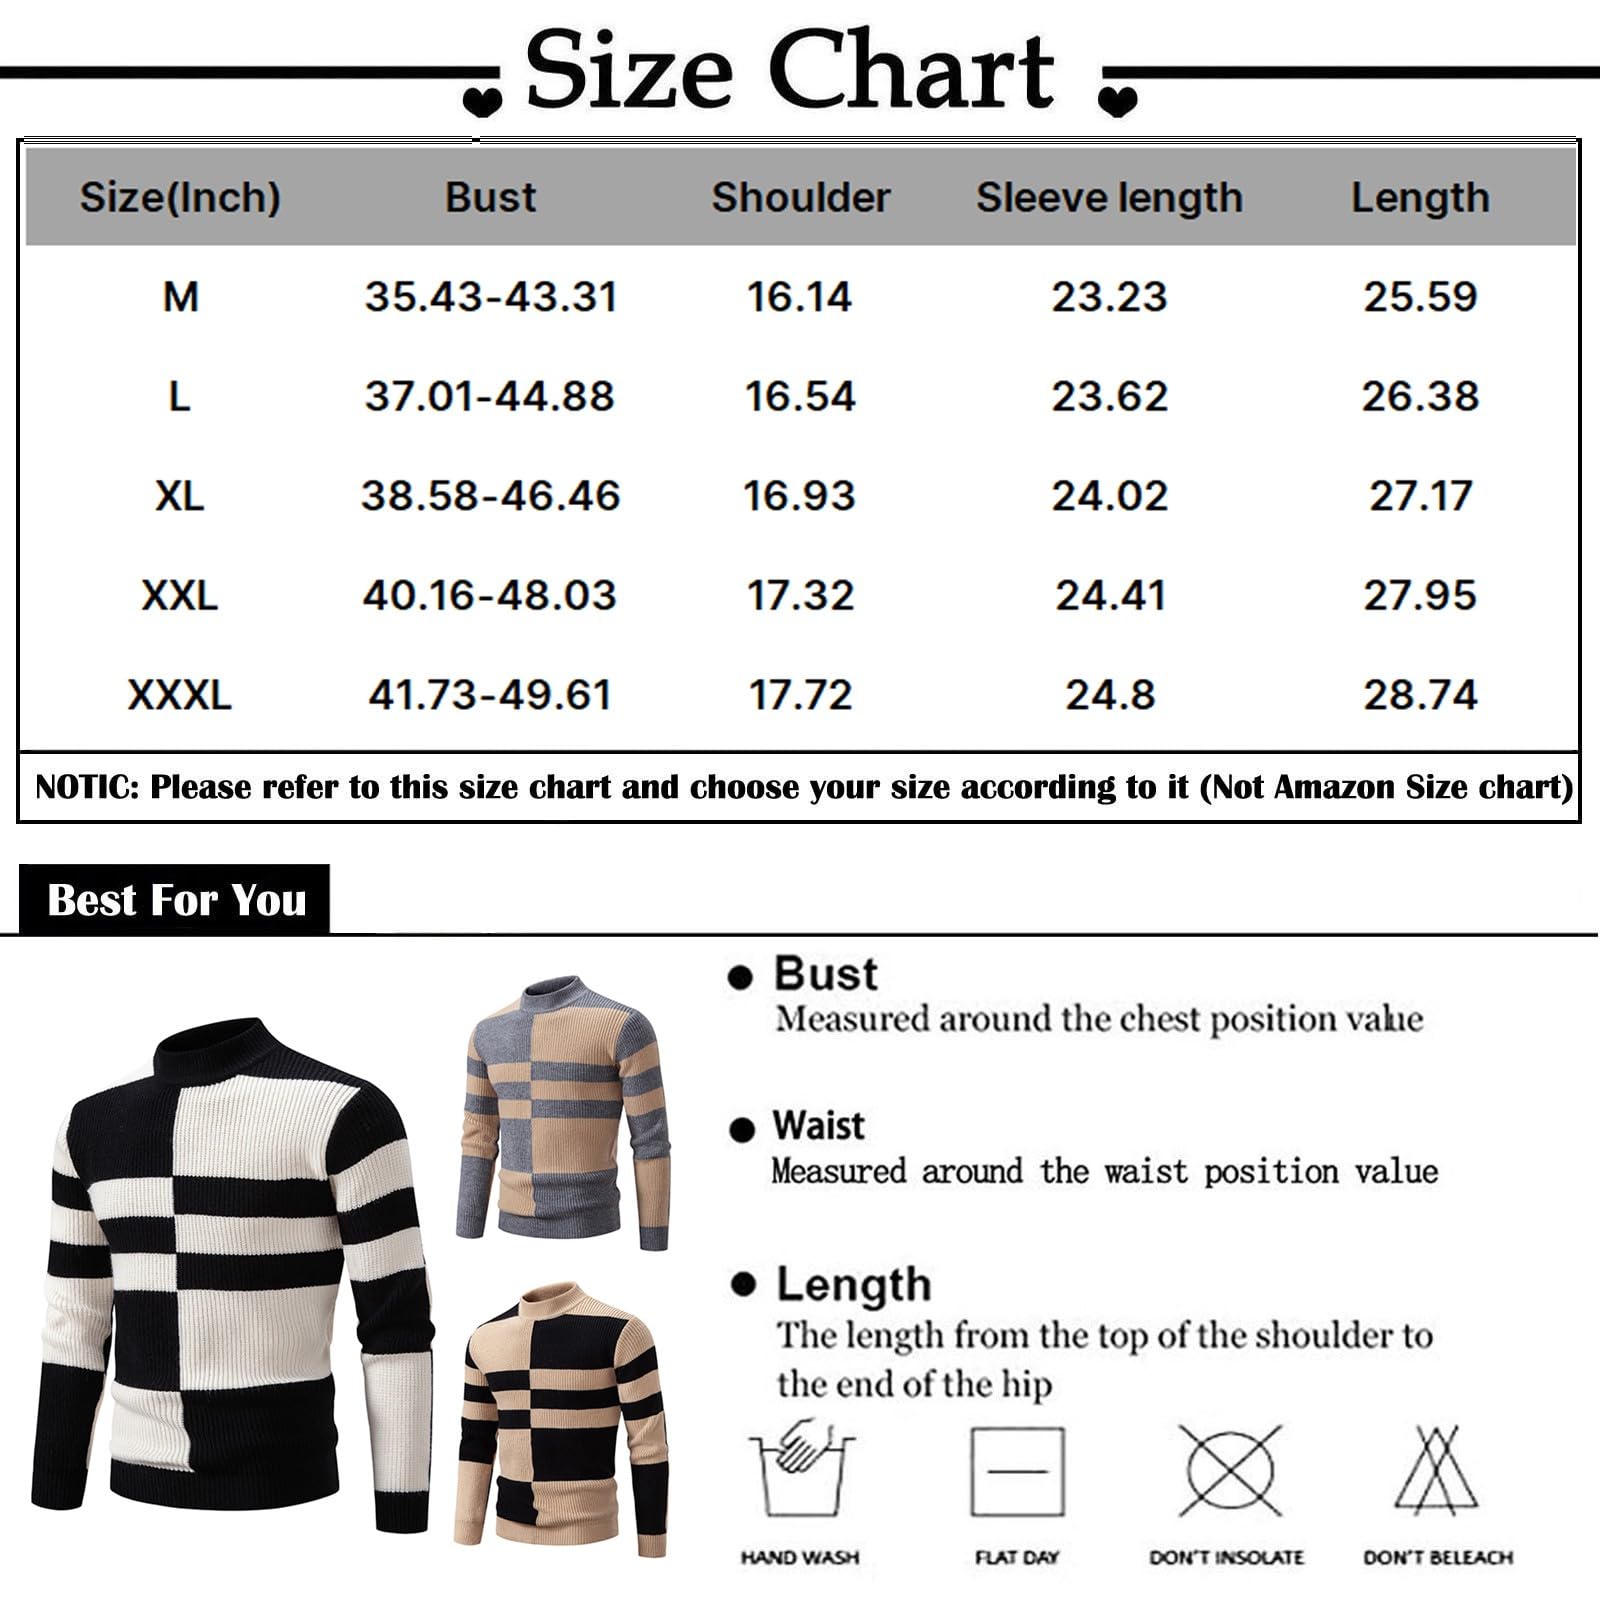 XIAXOGOOL Men's Sweater Crewneck Pullover Long Sleeve Color Block Cable Knit Warm Chunky Winter Jumper Sweaters